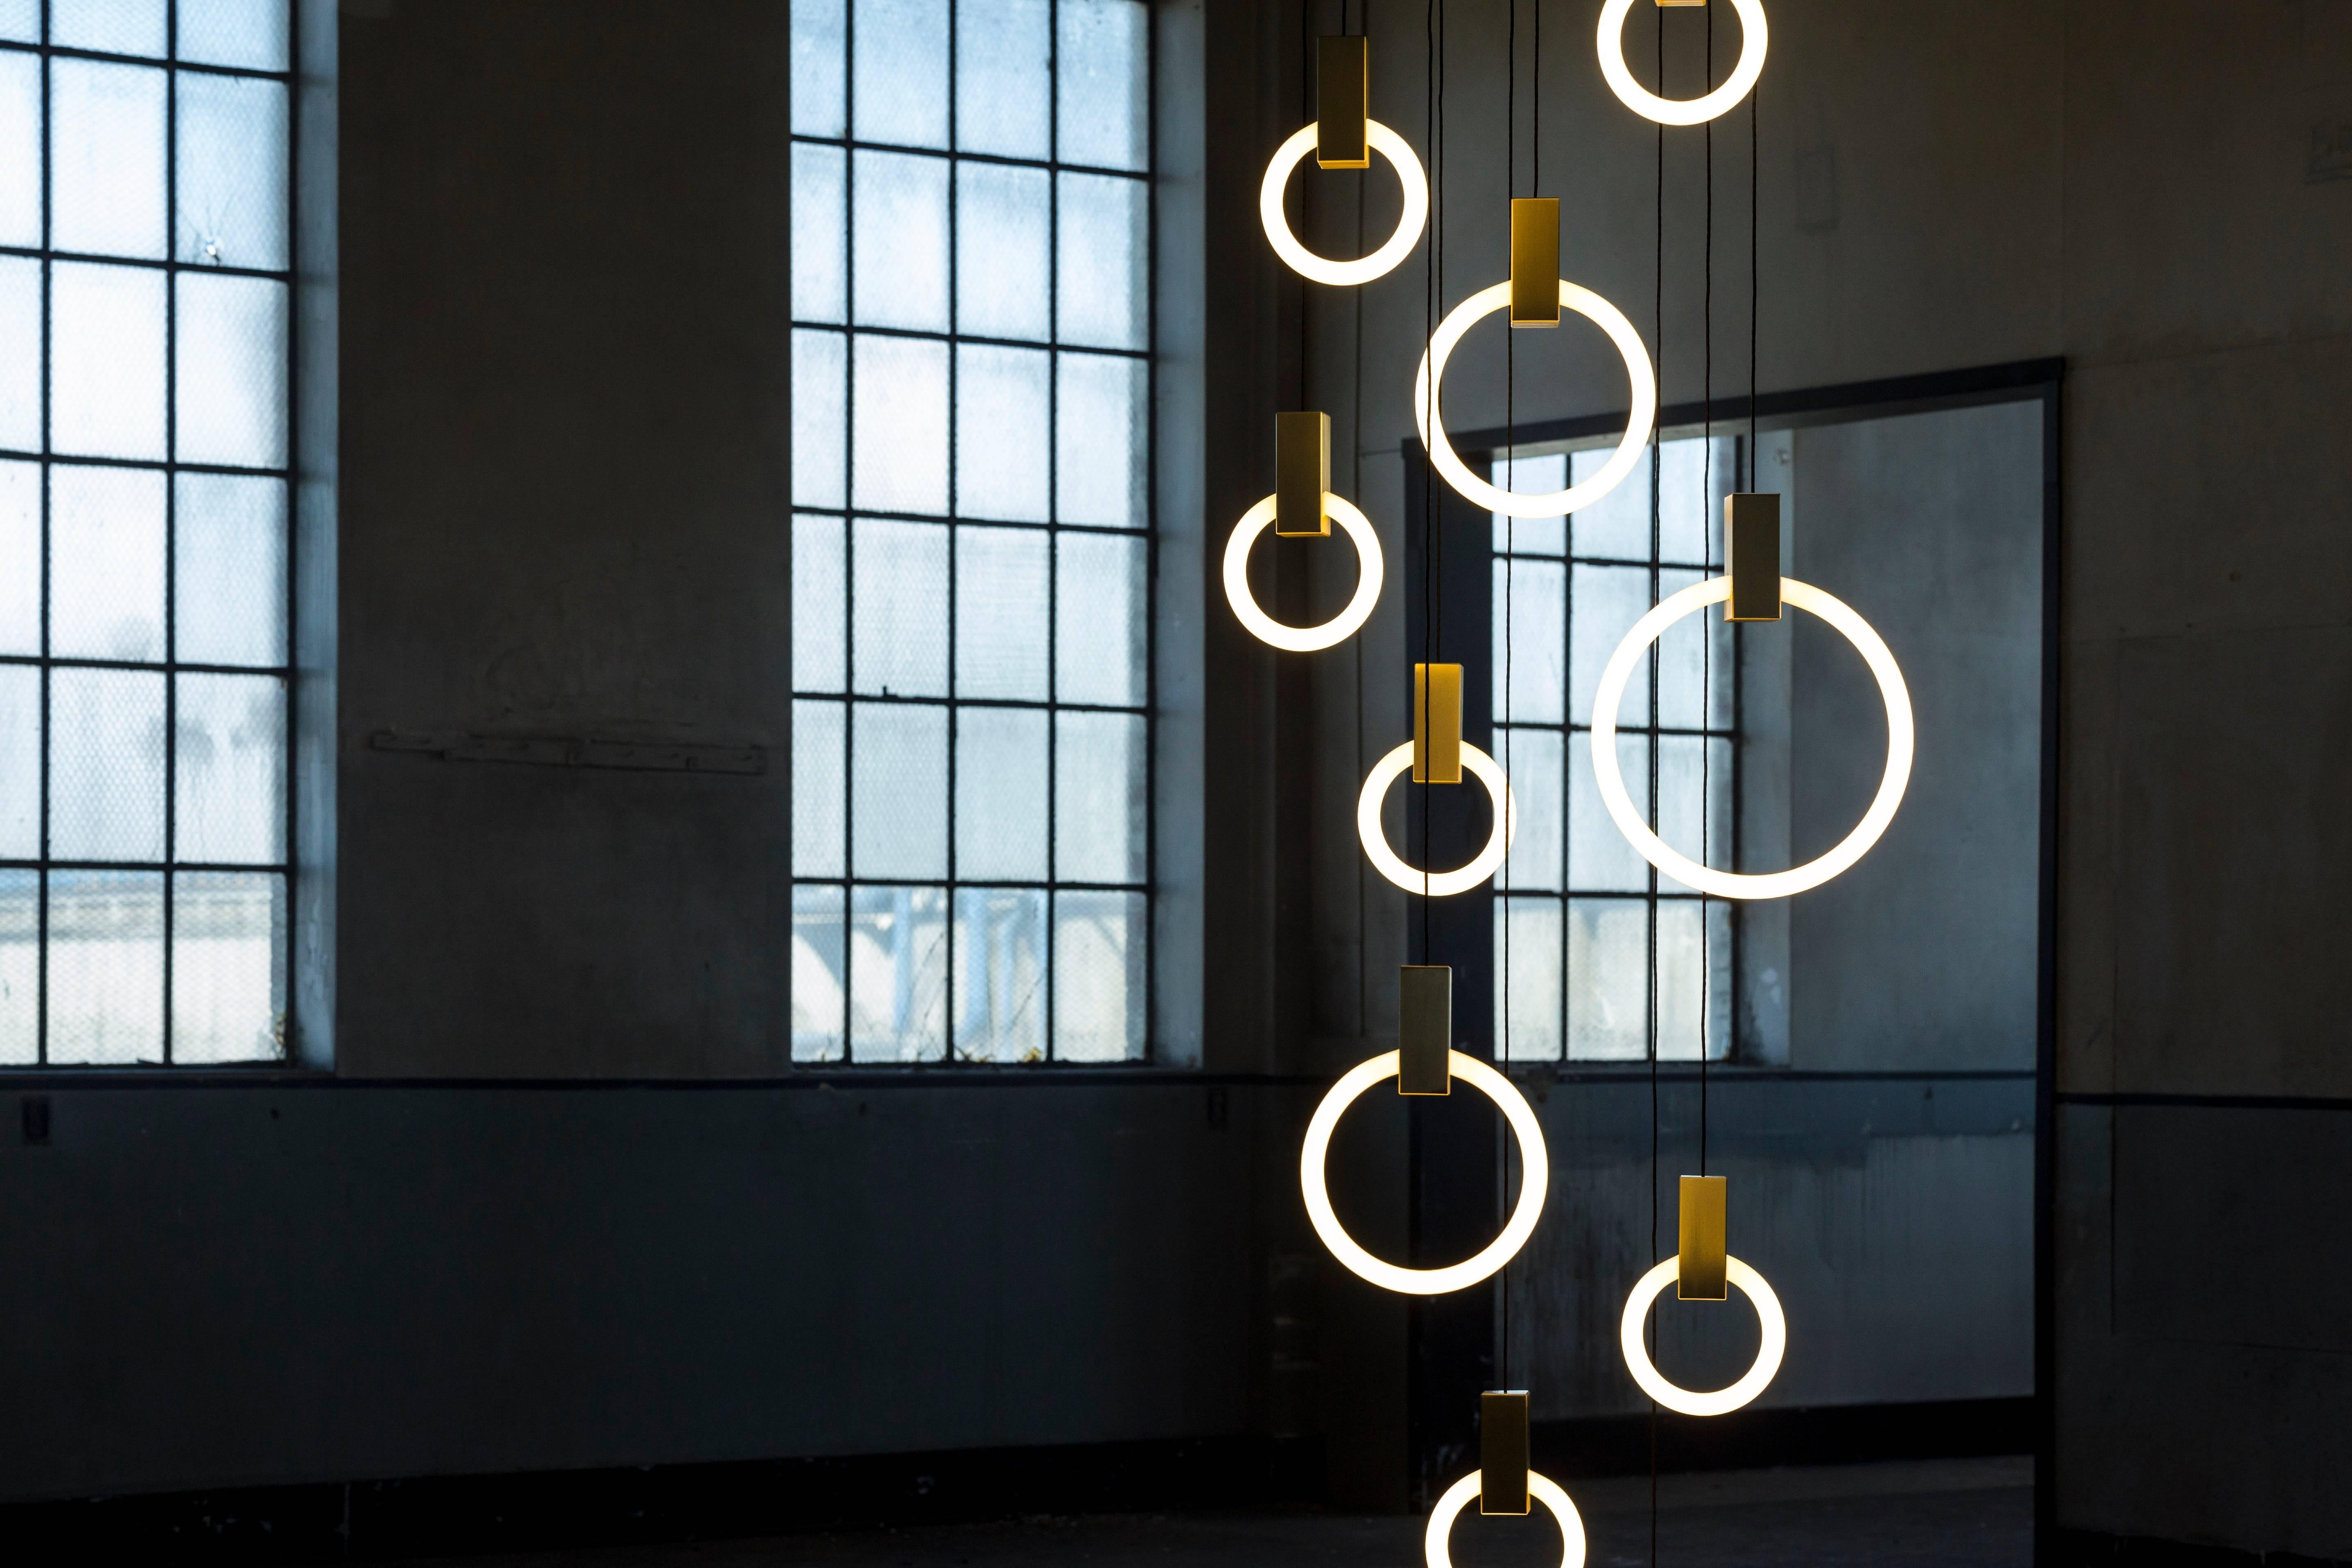 Originally conceived as a graphical interpretation of effervescence, Halo is a series of bold lamps inspired by the warm glow of their illuminaire. The modularity of the Halo system allows the pendants to be suspended in a multitude of compositions,